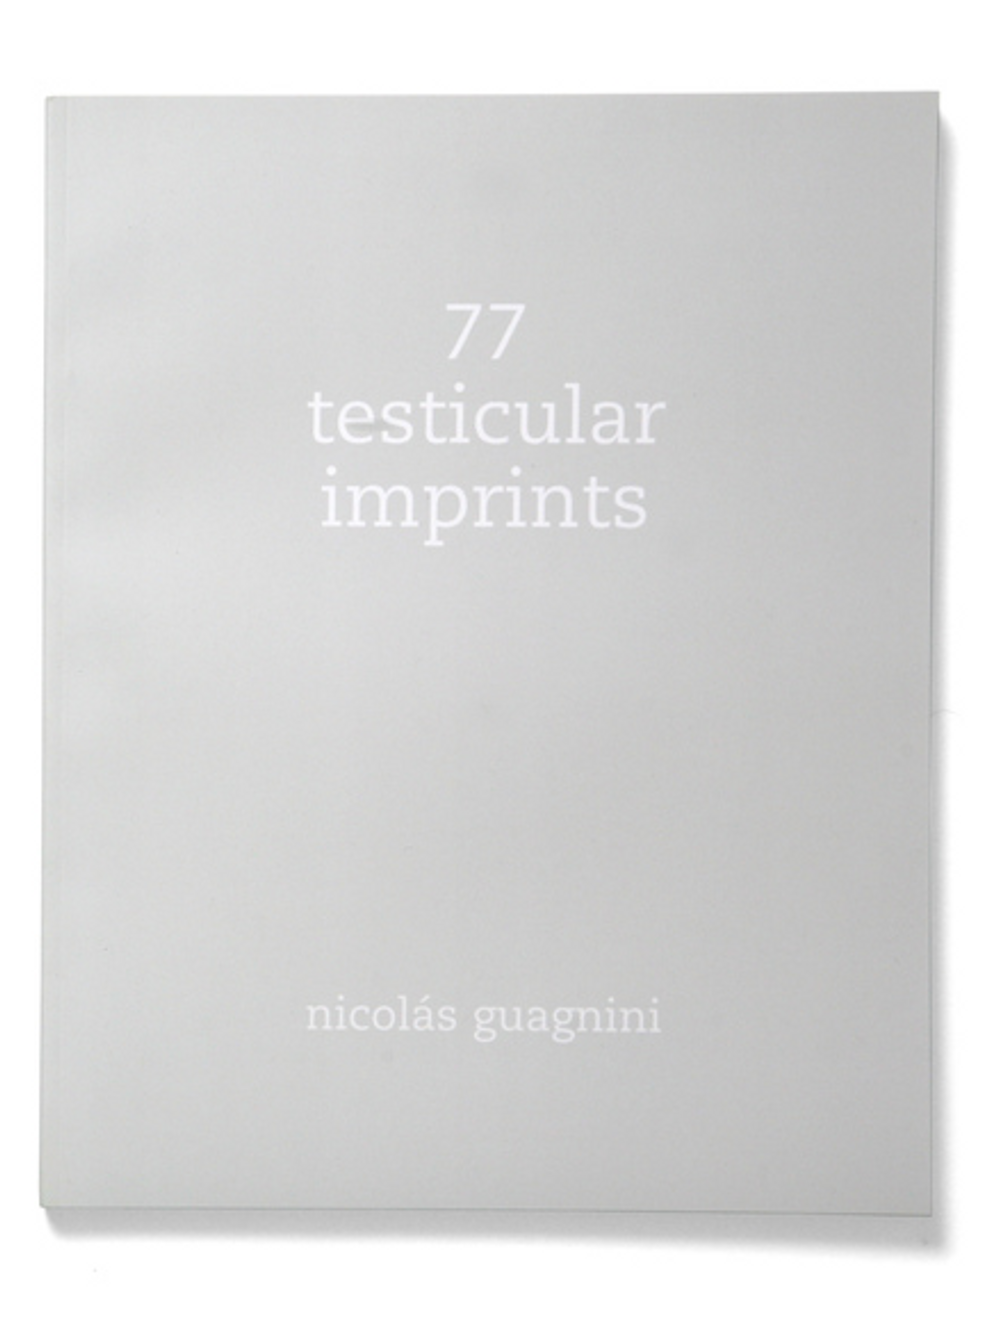 Book cover on plain gray background with title of 77 Testicular Imprints